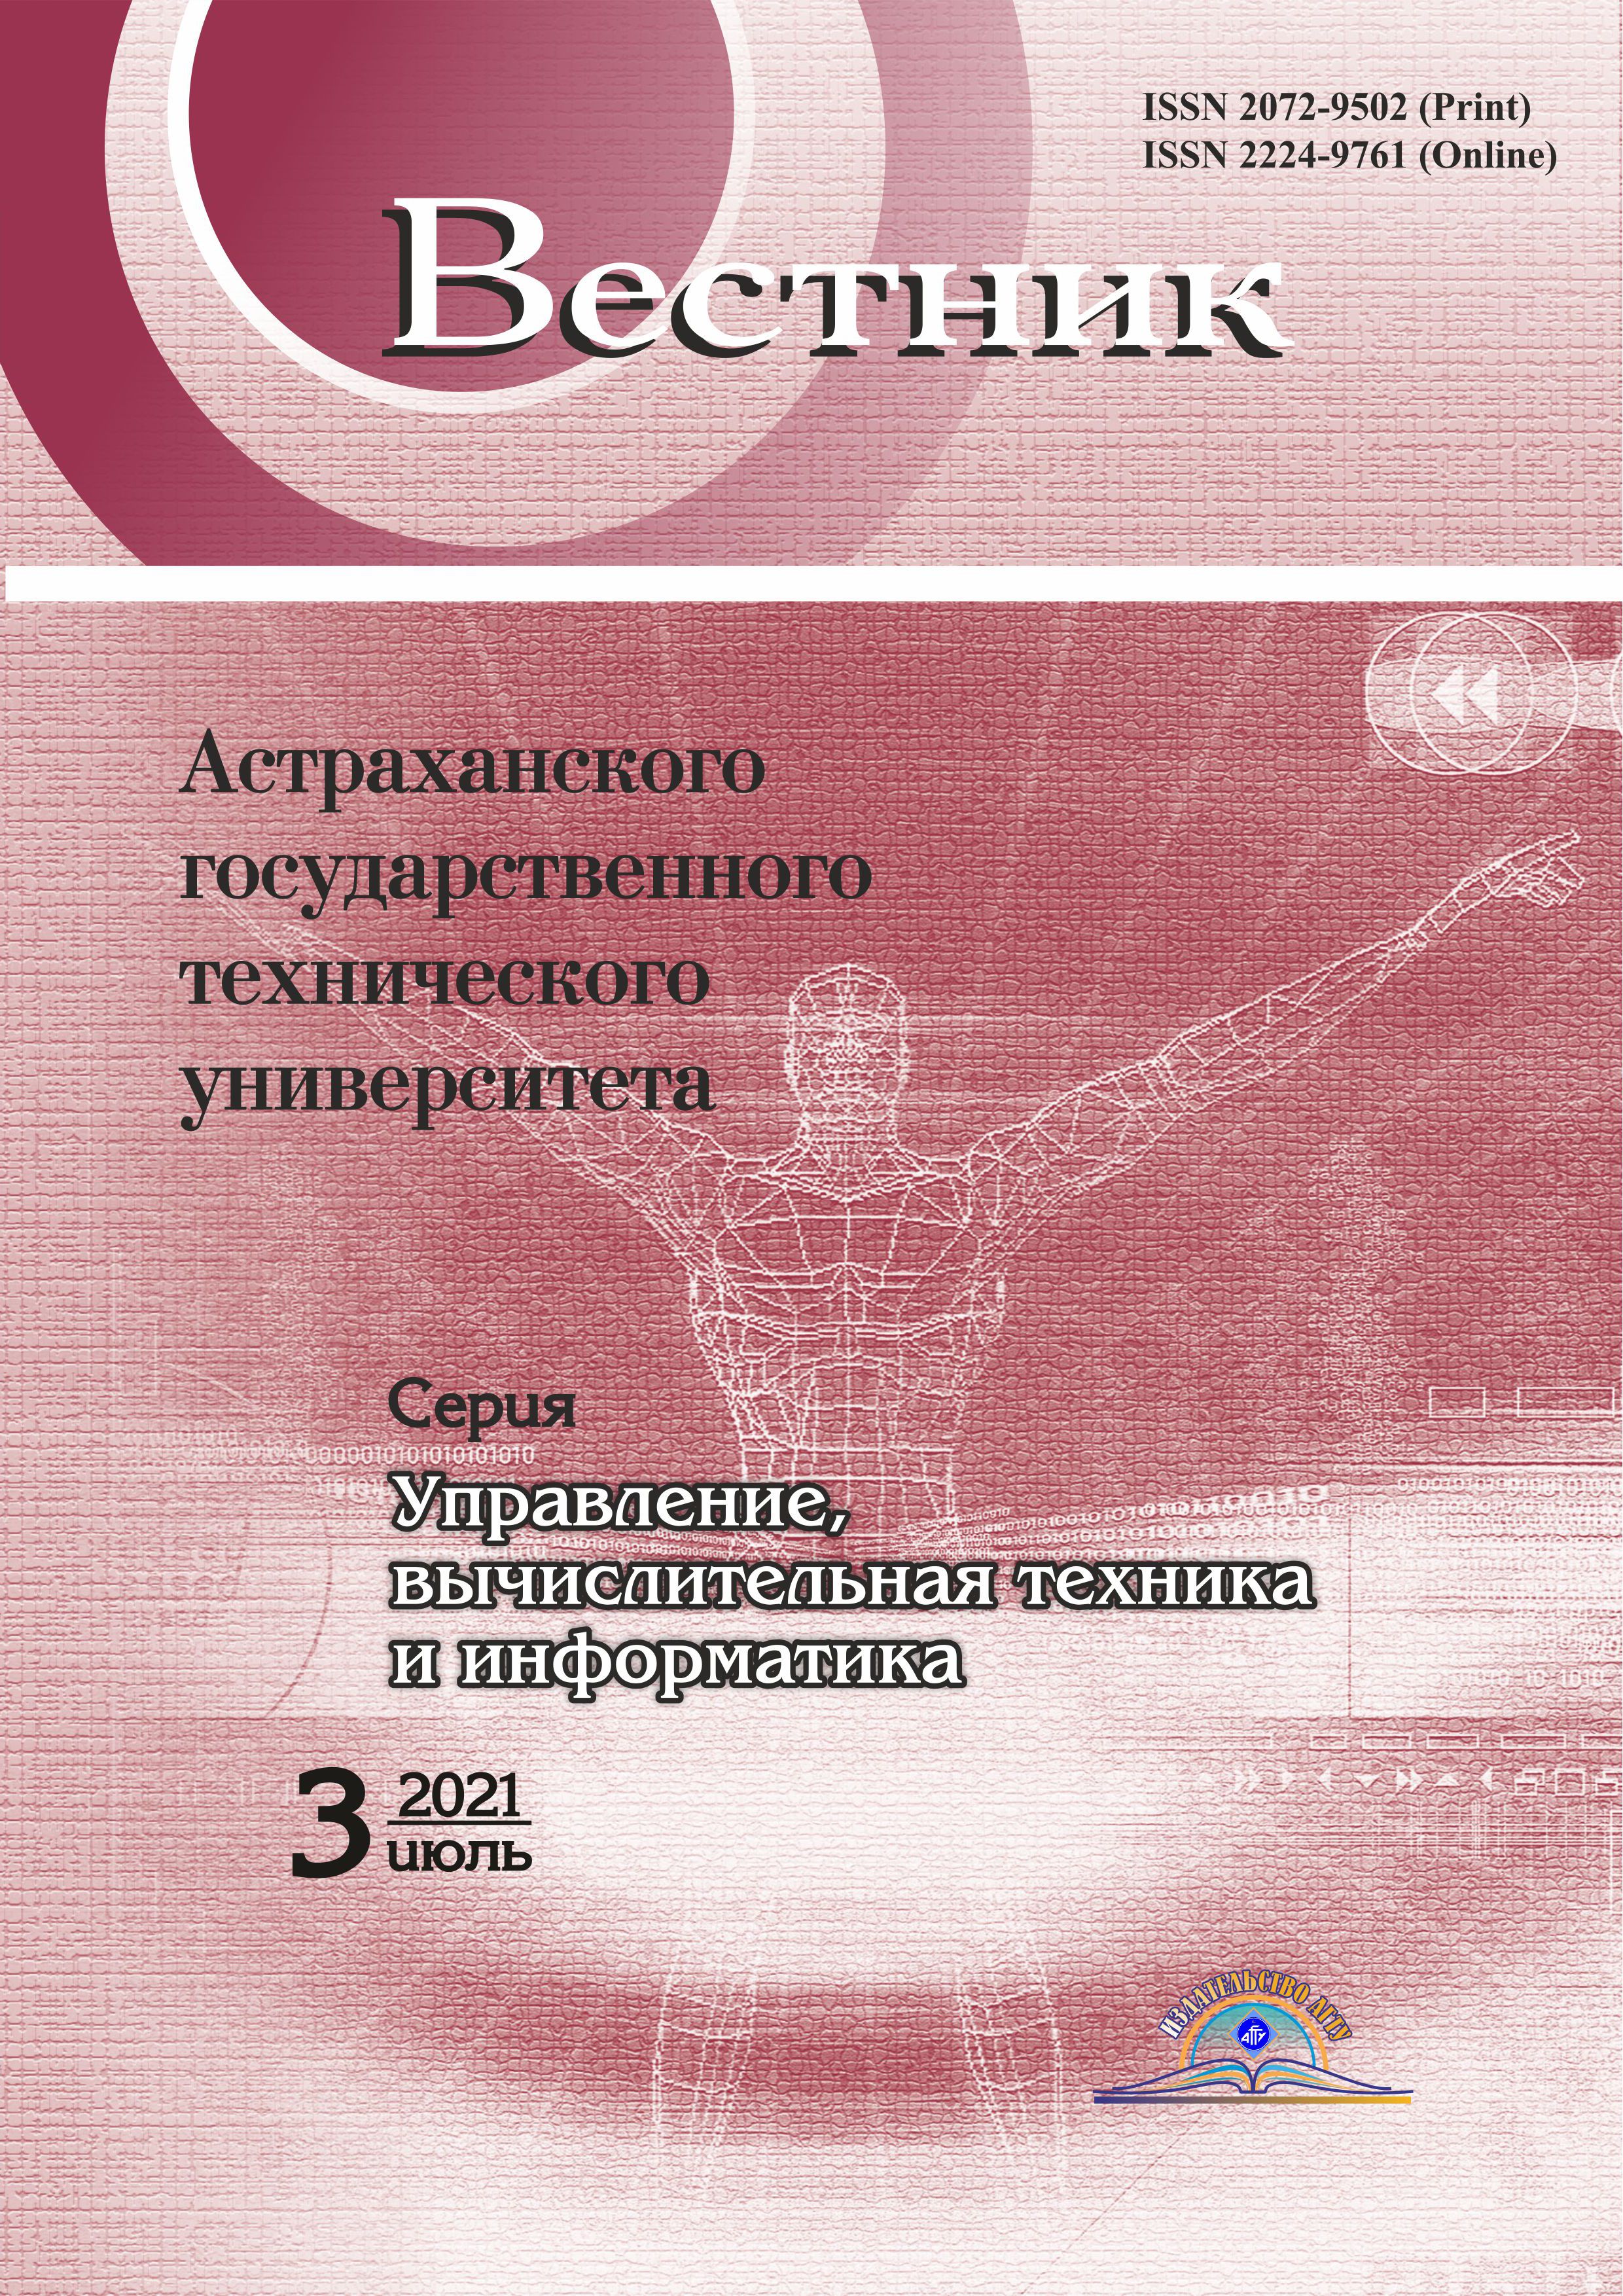                         FUZZY MANAGEMENT OF INFORMATION AND SECURITY EVENTS:  FEATURES OF CONSTRUCTING MEMBERSHIP FUNCTIONS
            